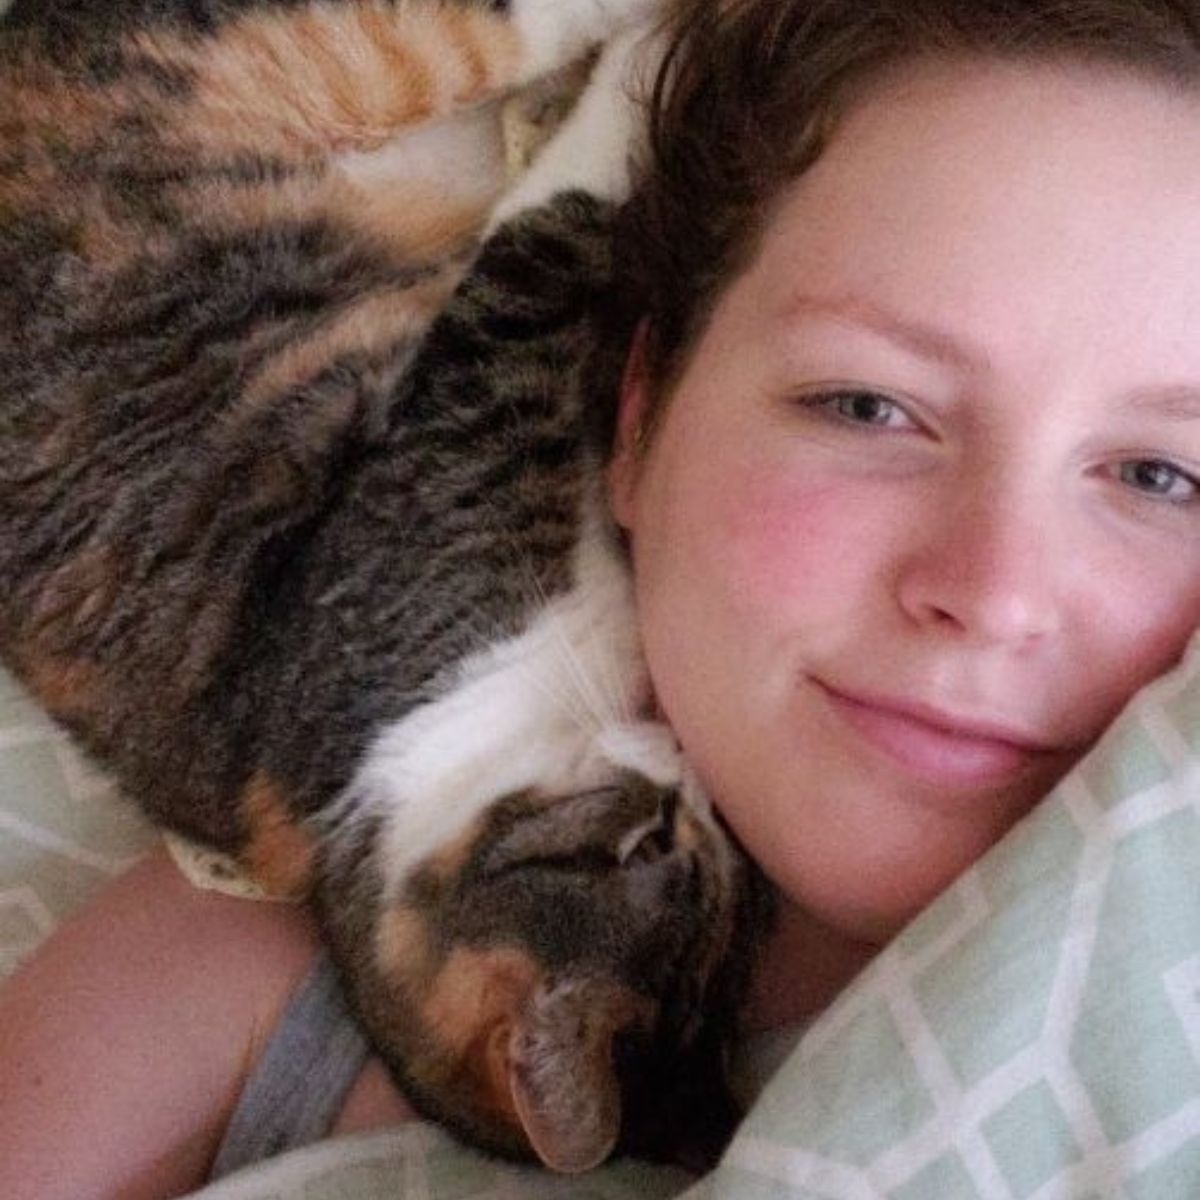 woman and cat cuddling